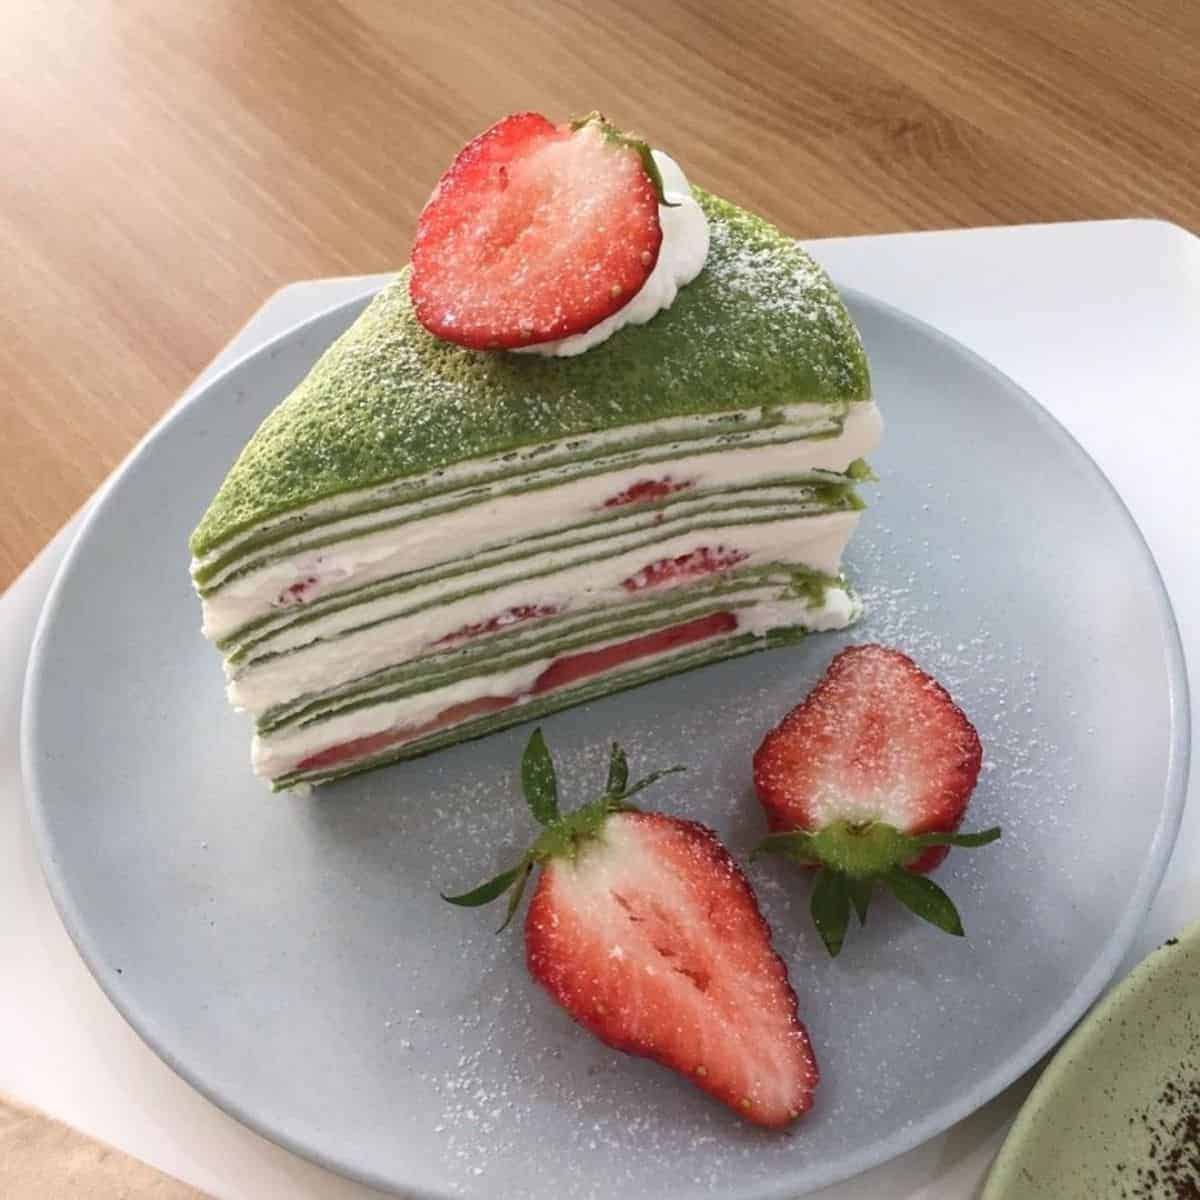 Beautiful reddish fruity fillings of a green tea crepe cake and three slices of fresh strawberries